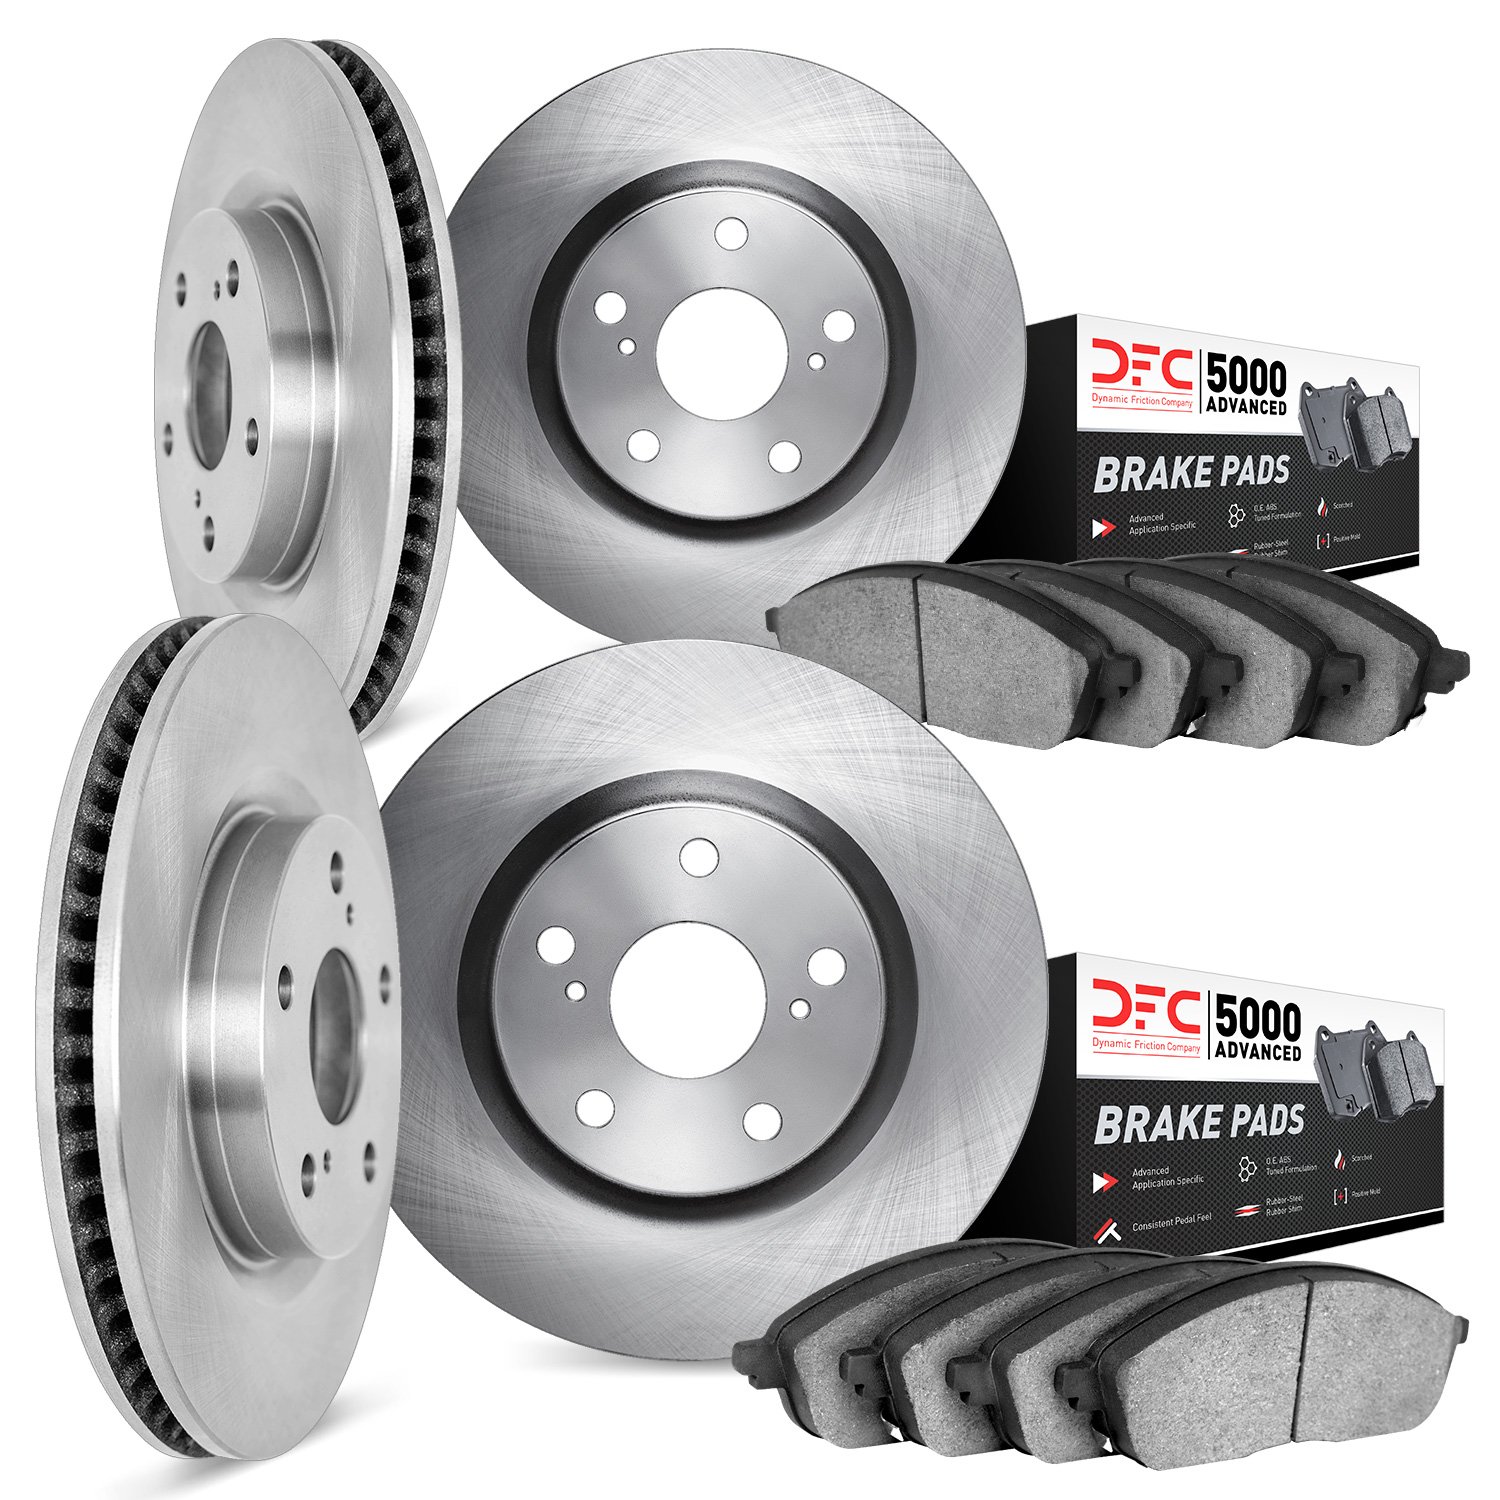 6504-31032 Brake Rotors w/5000 Advanced Brake Pads Kit, 2008-2013 BMW, Position: Front and Rear